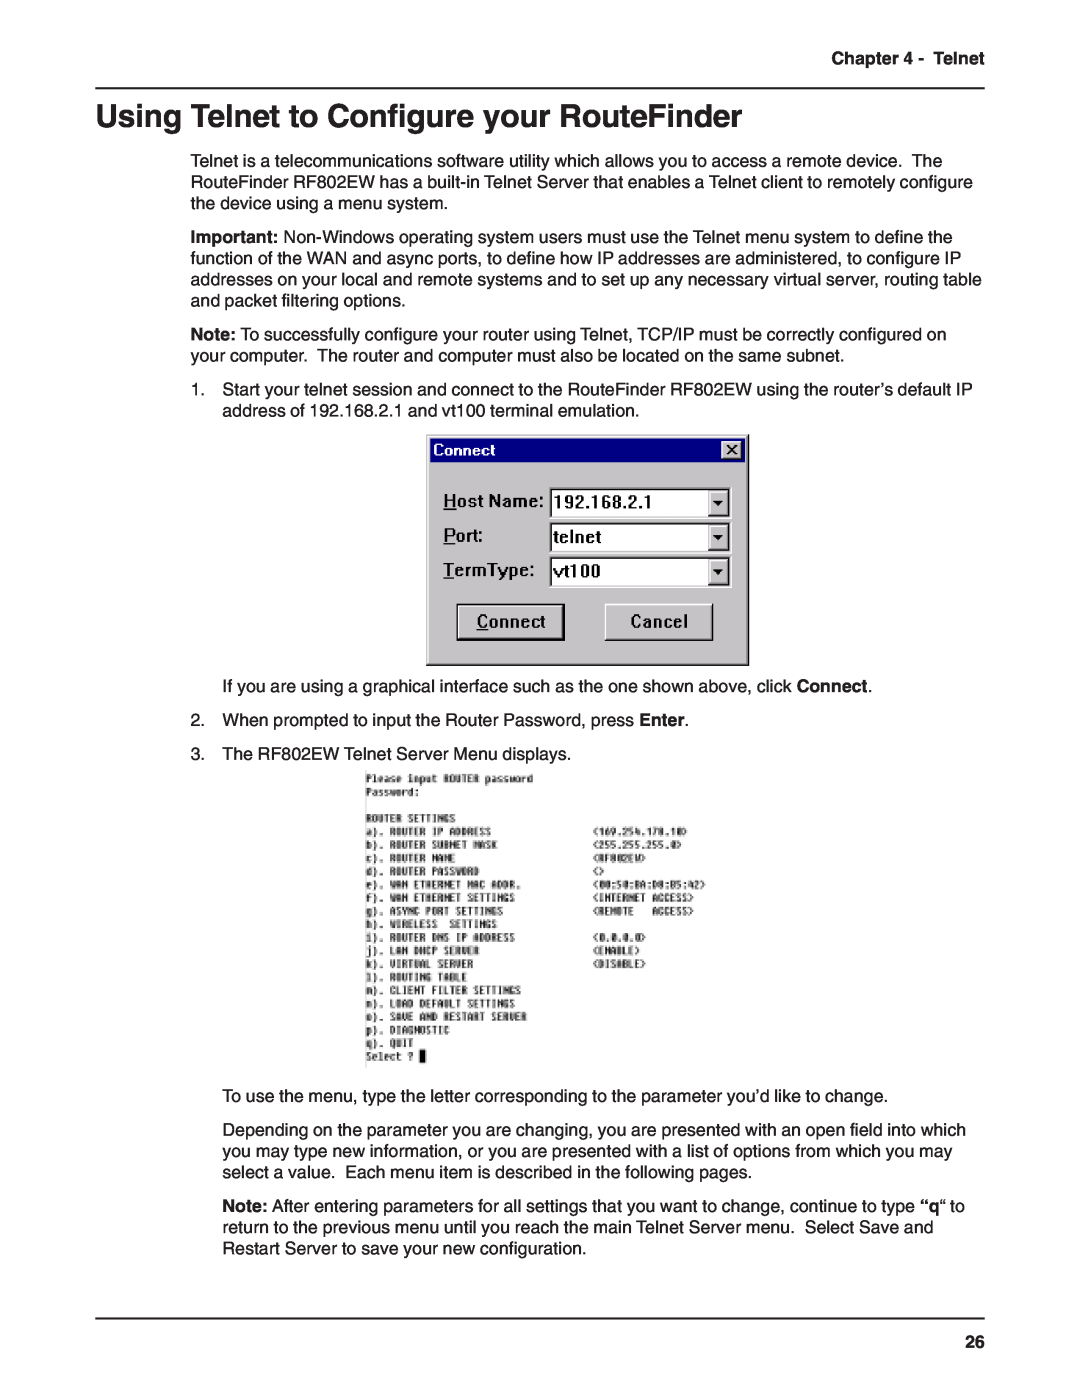 Multi-Tech Systems RF802EW manual Using Telnet to Configure your RouteFinder 